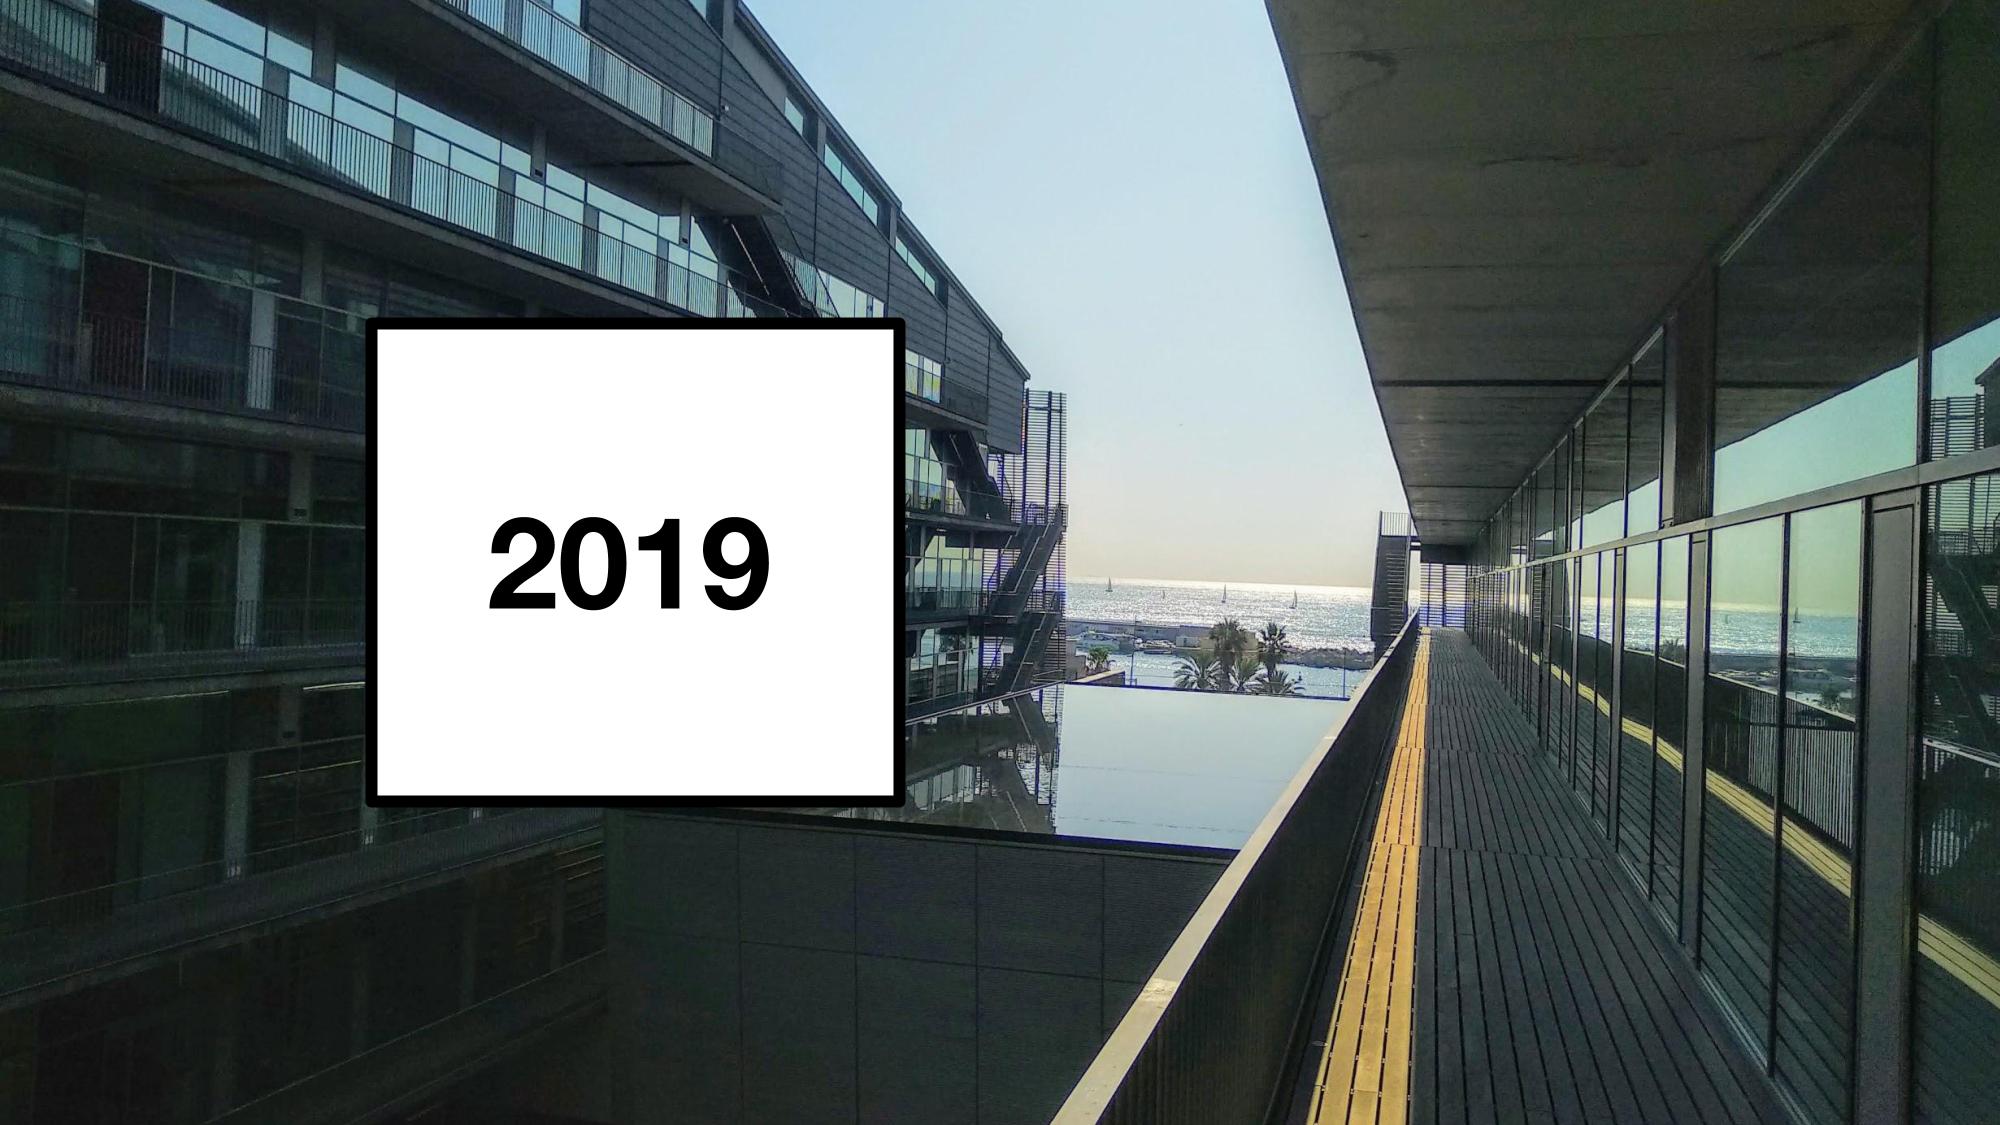 The annual report of the PRBB 2019 invites us to review the main events that took place last year in the park.